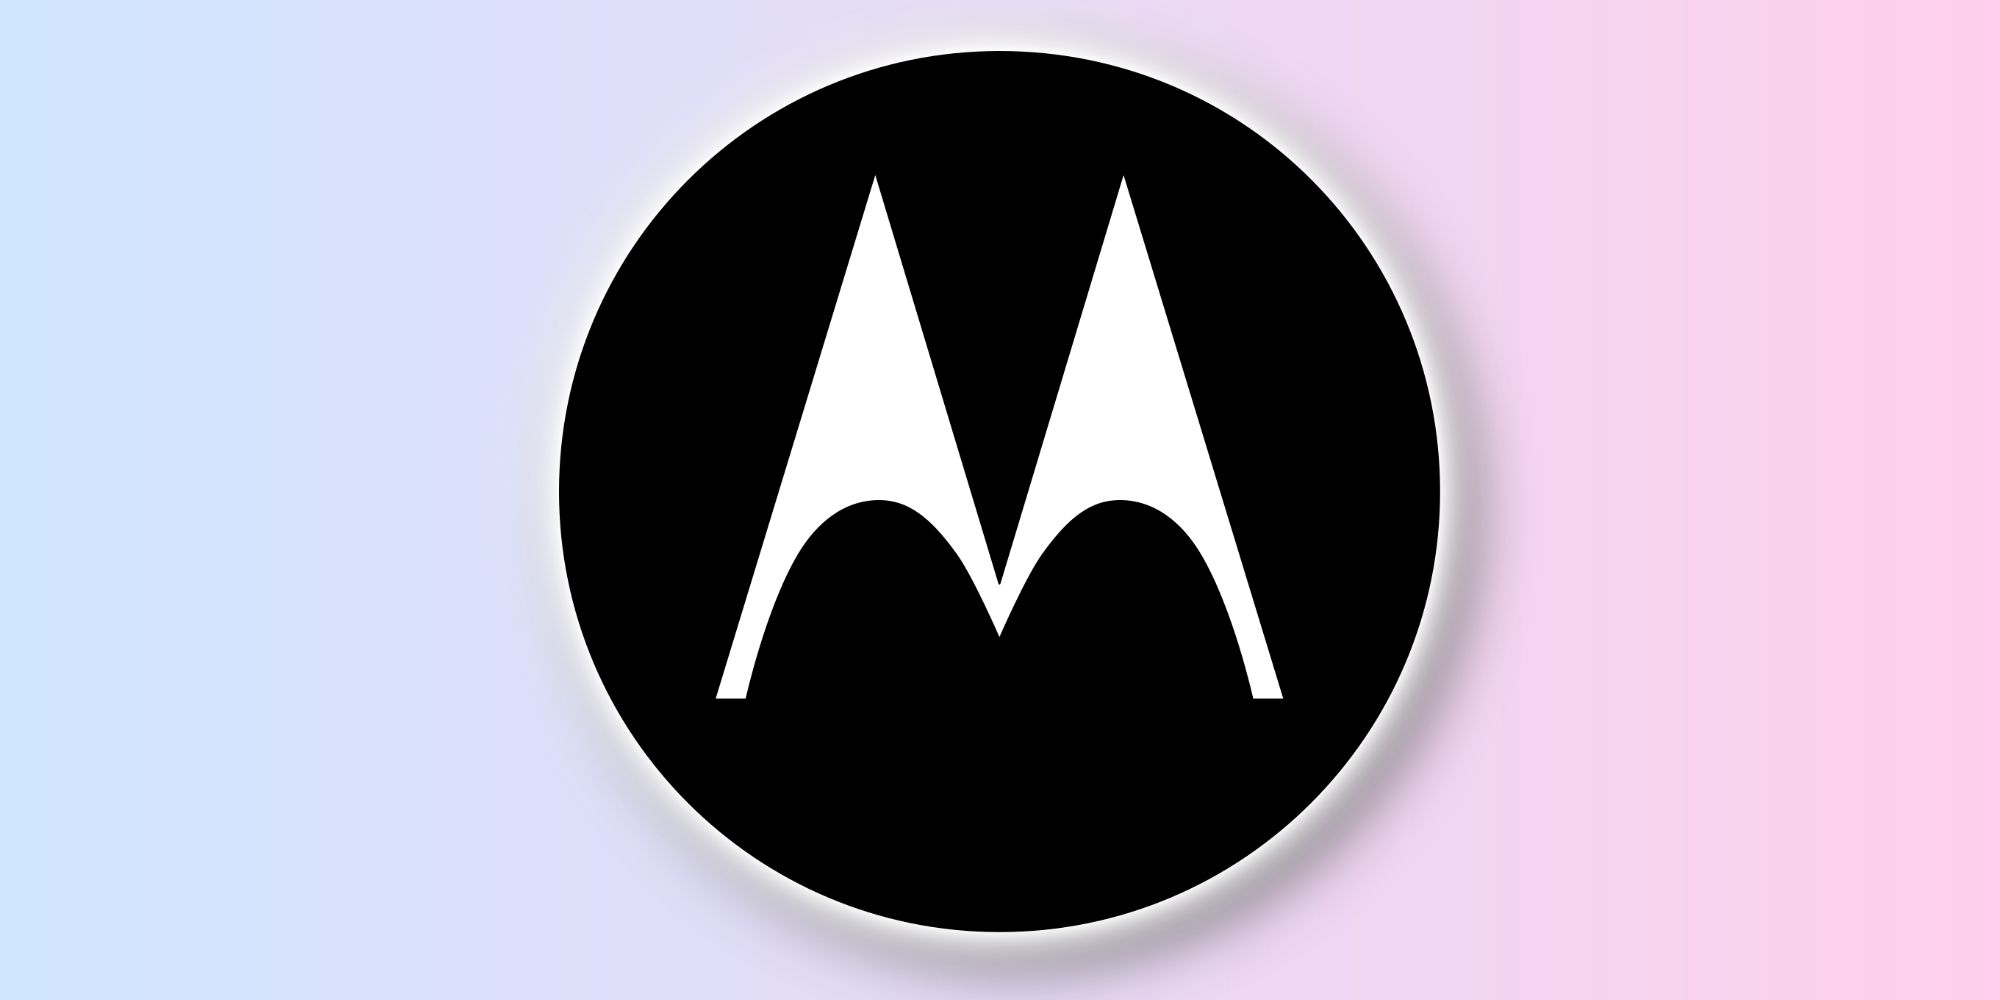 Glowing Motorola logo on a blue and pink background